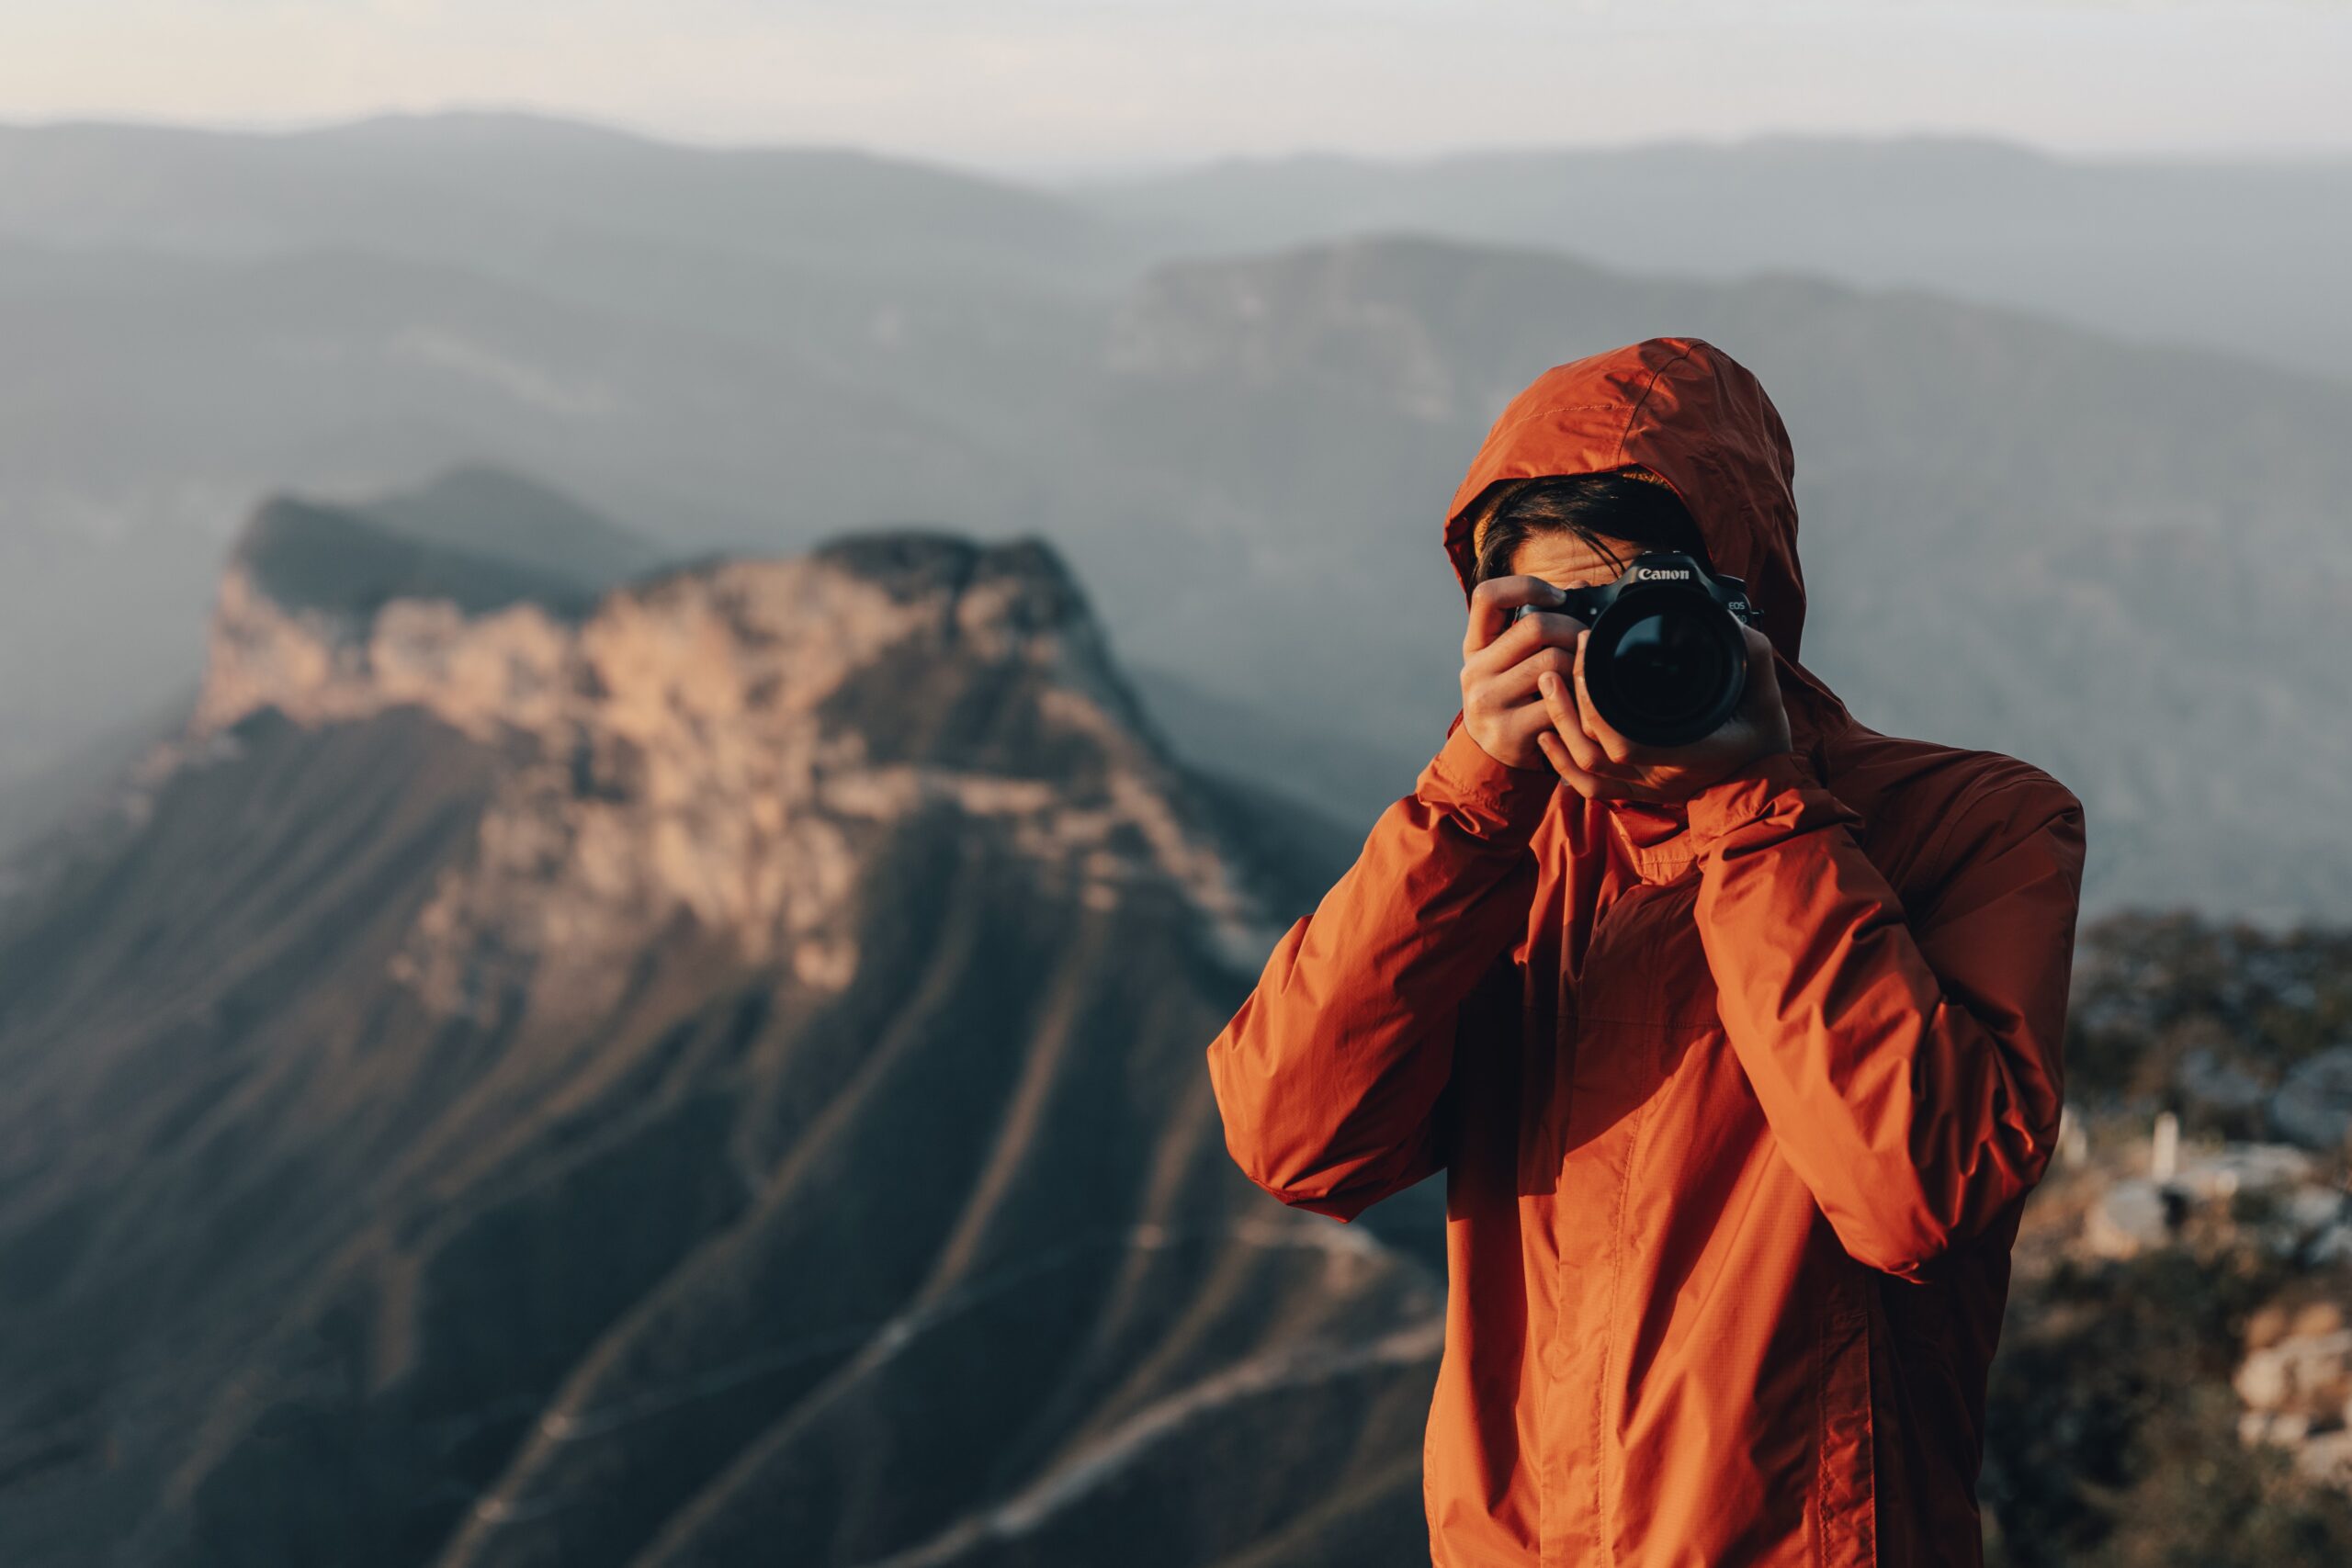 A man in the mountains taking a photo